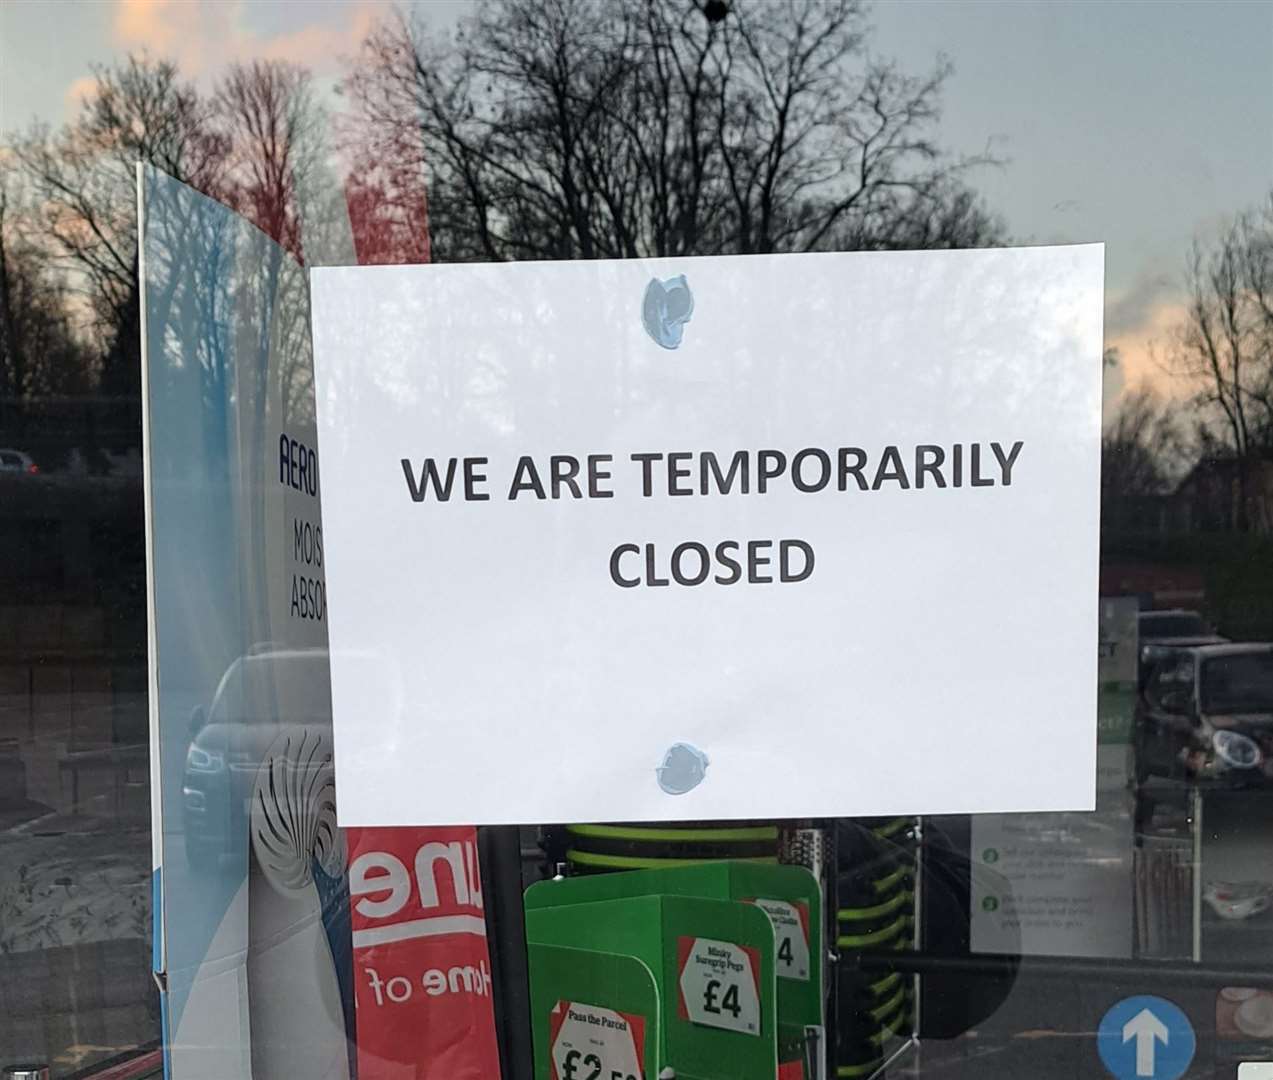 Customers were not told why the shop shut